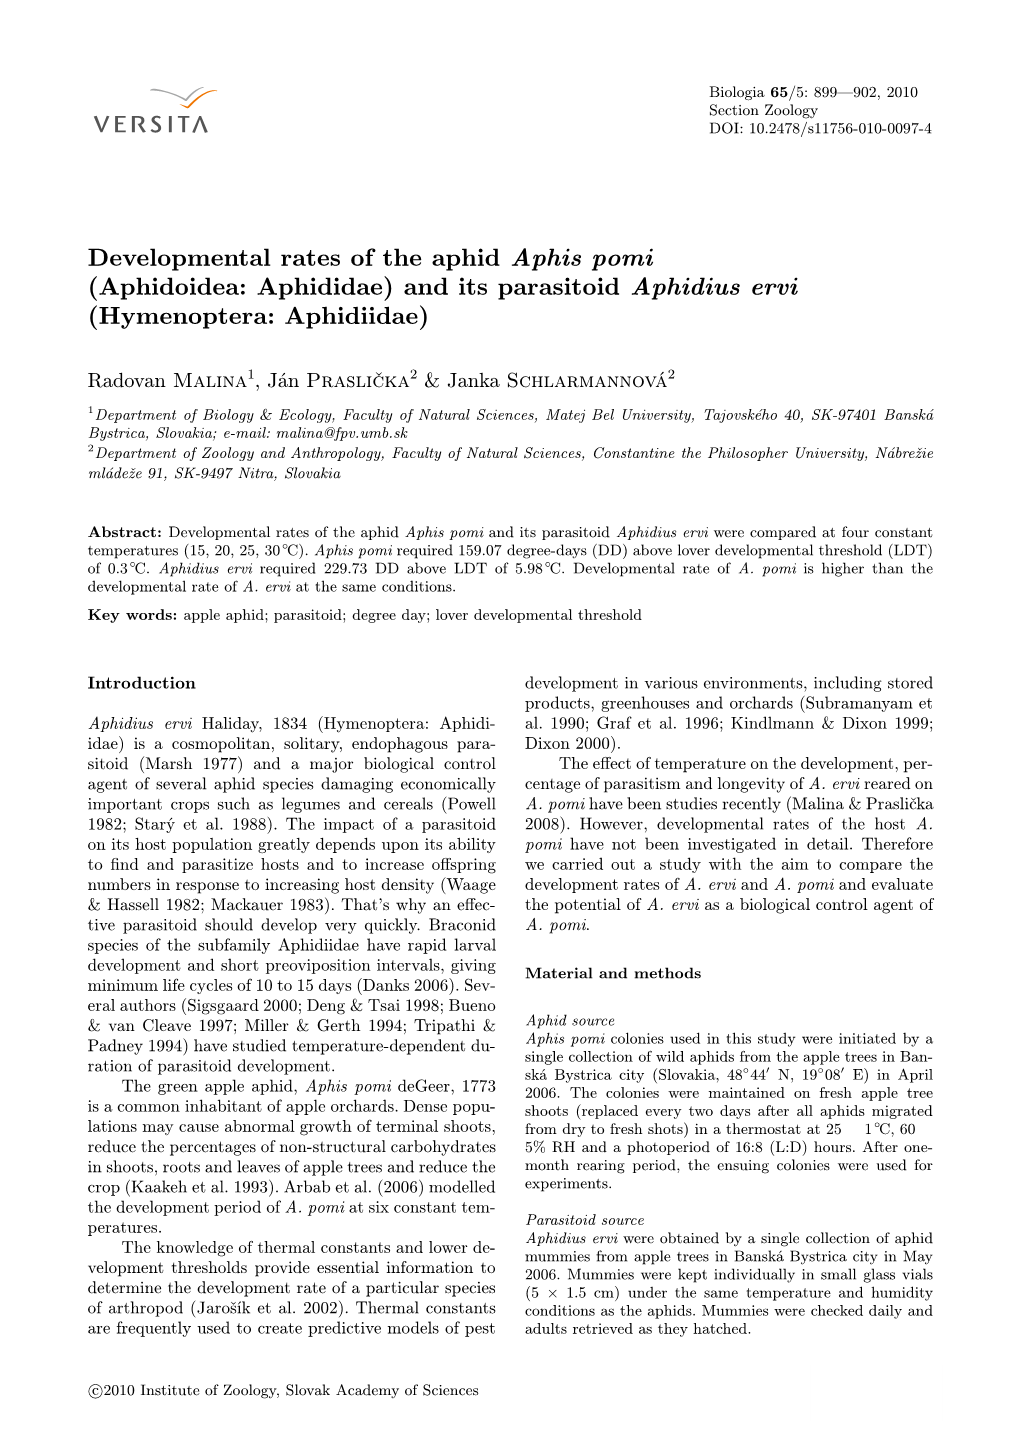 Developmental Rates of the Aphid Aphis Pomi (Aphidoidea: Aphididae) and Its Parasitoid Aphidius Ervi (Hymenoptera: Aphidiidae)